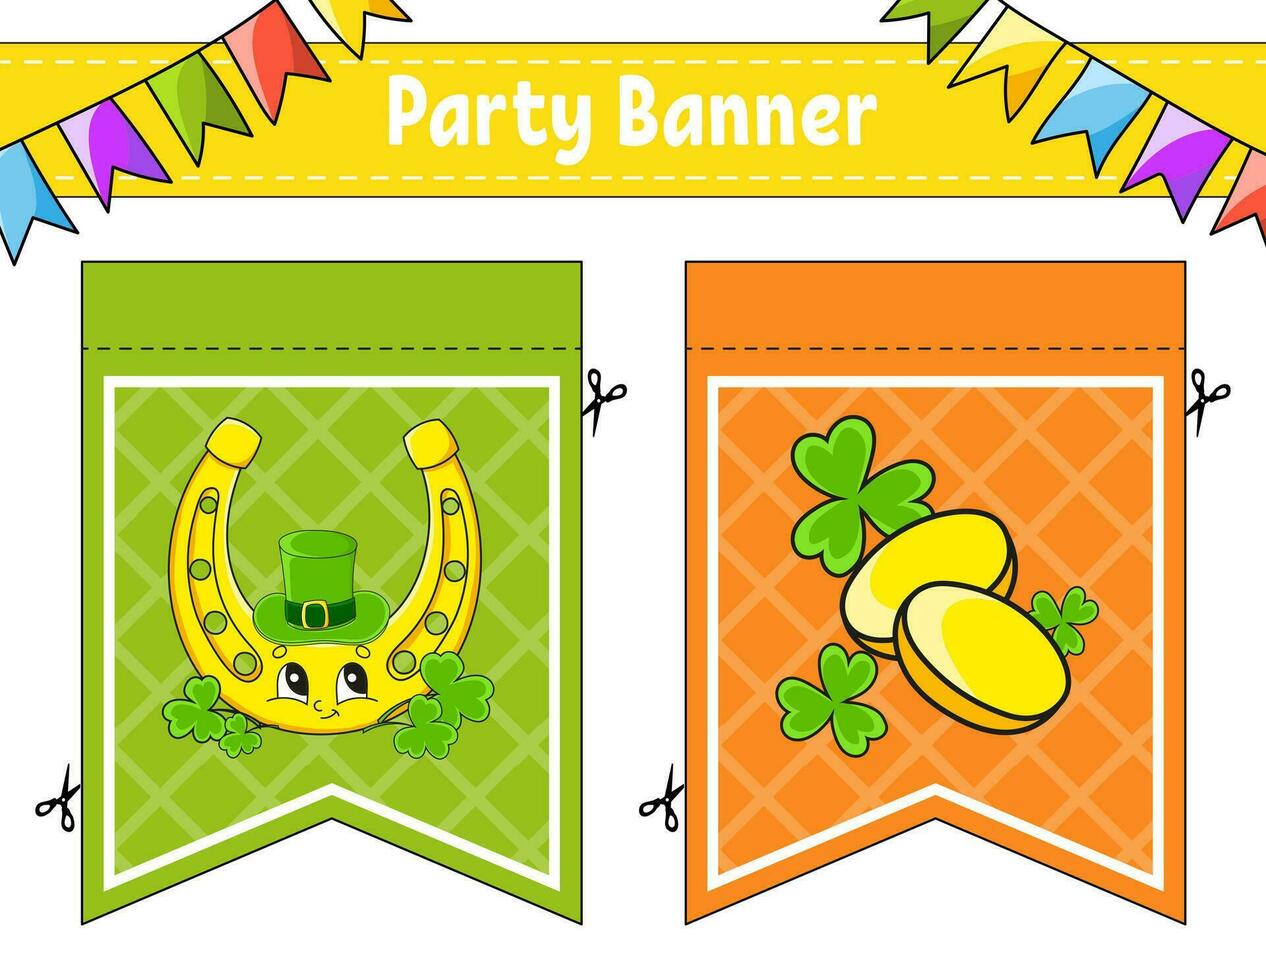 Party banner. With cute cartoon characters. For holidays, birthday, festive. Vector illustration.